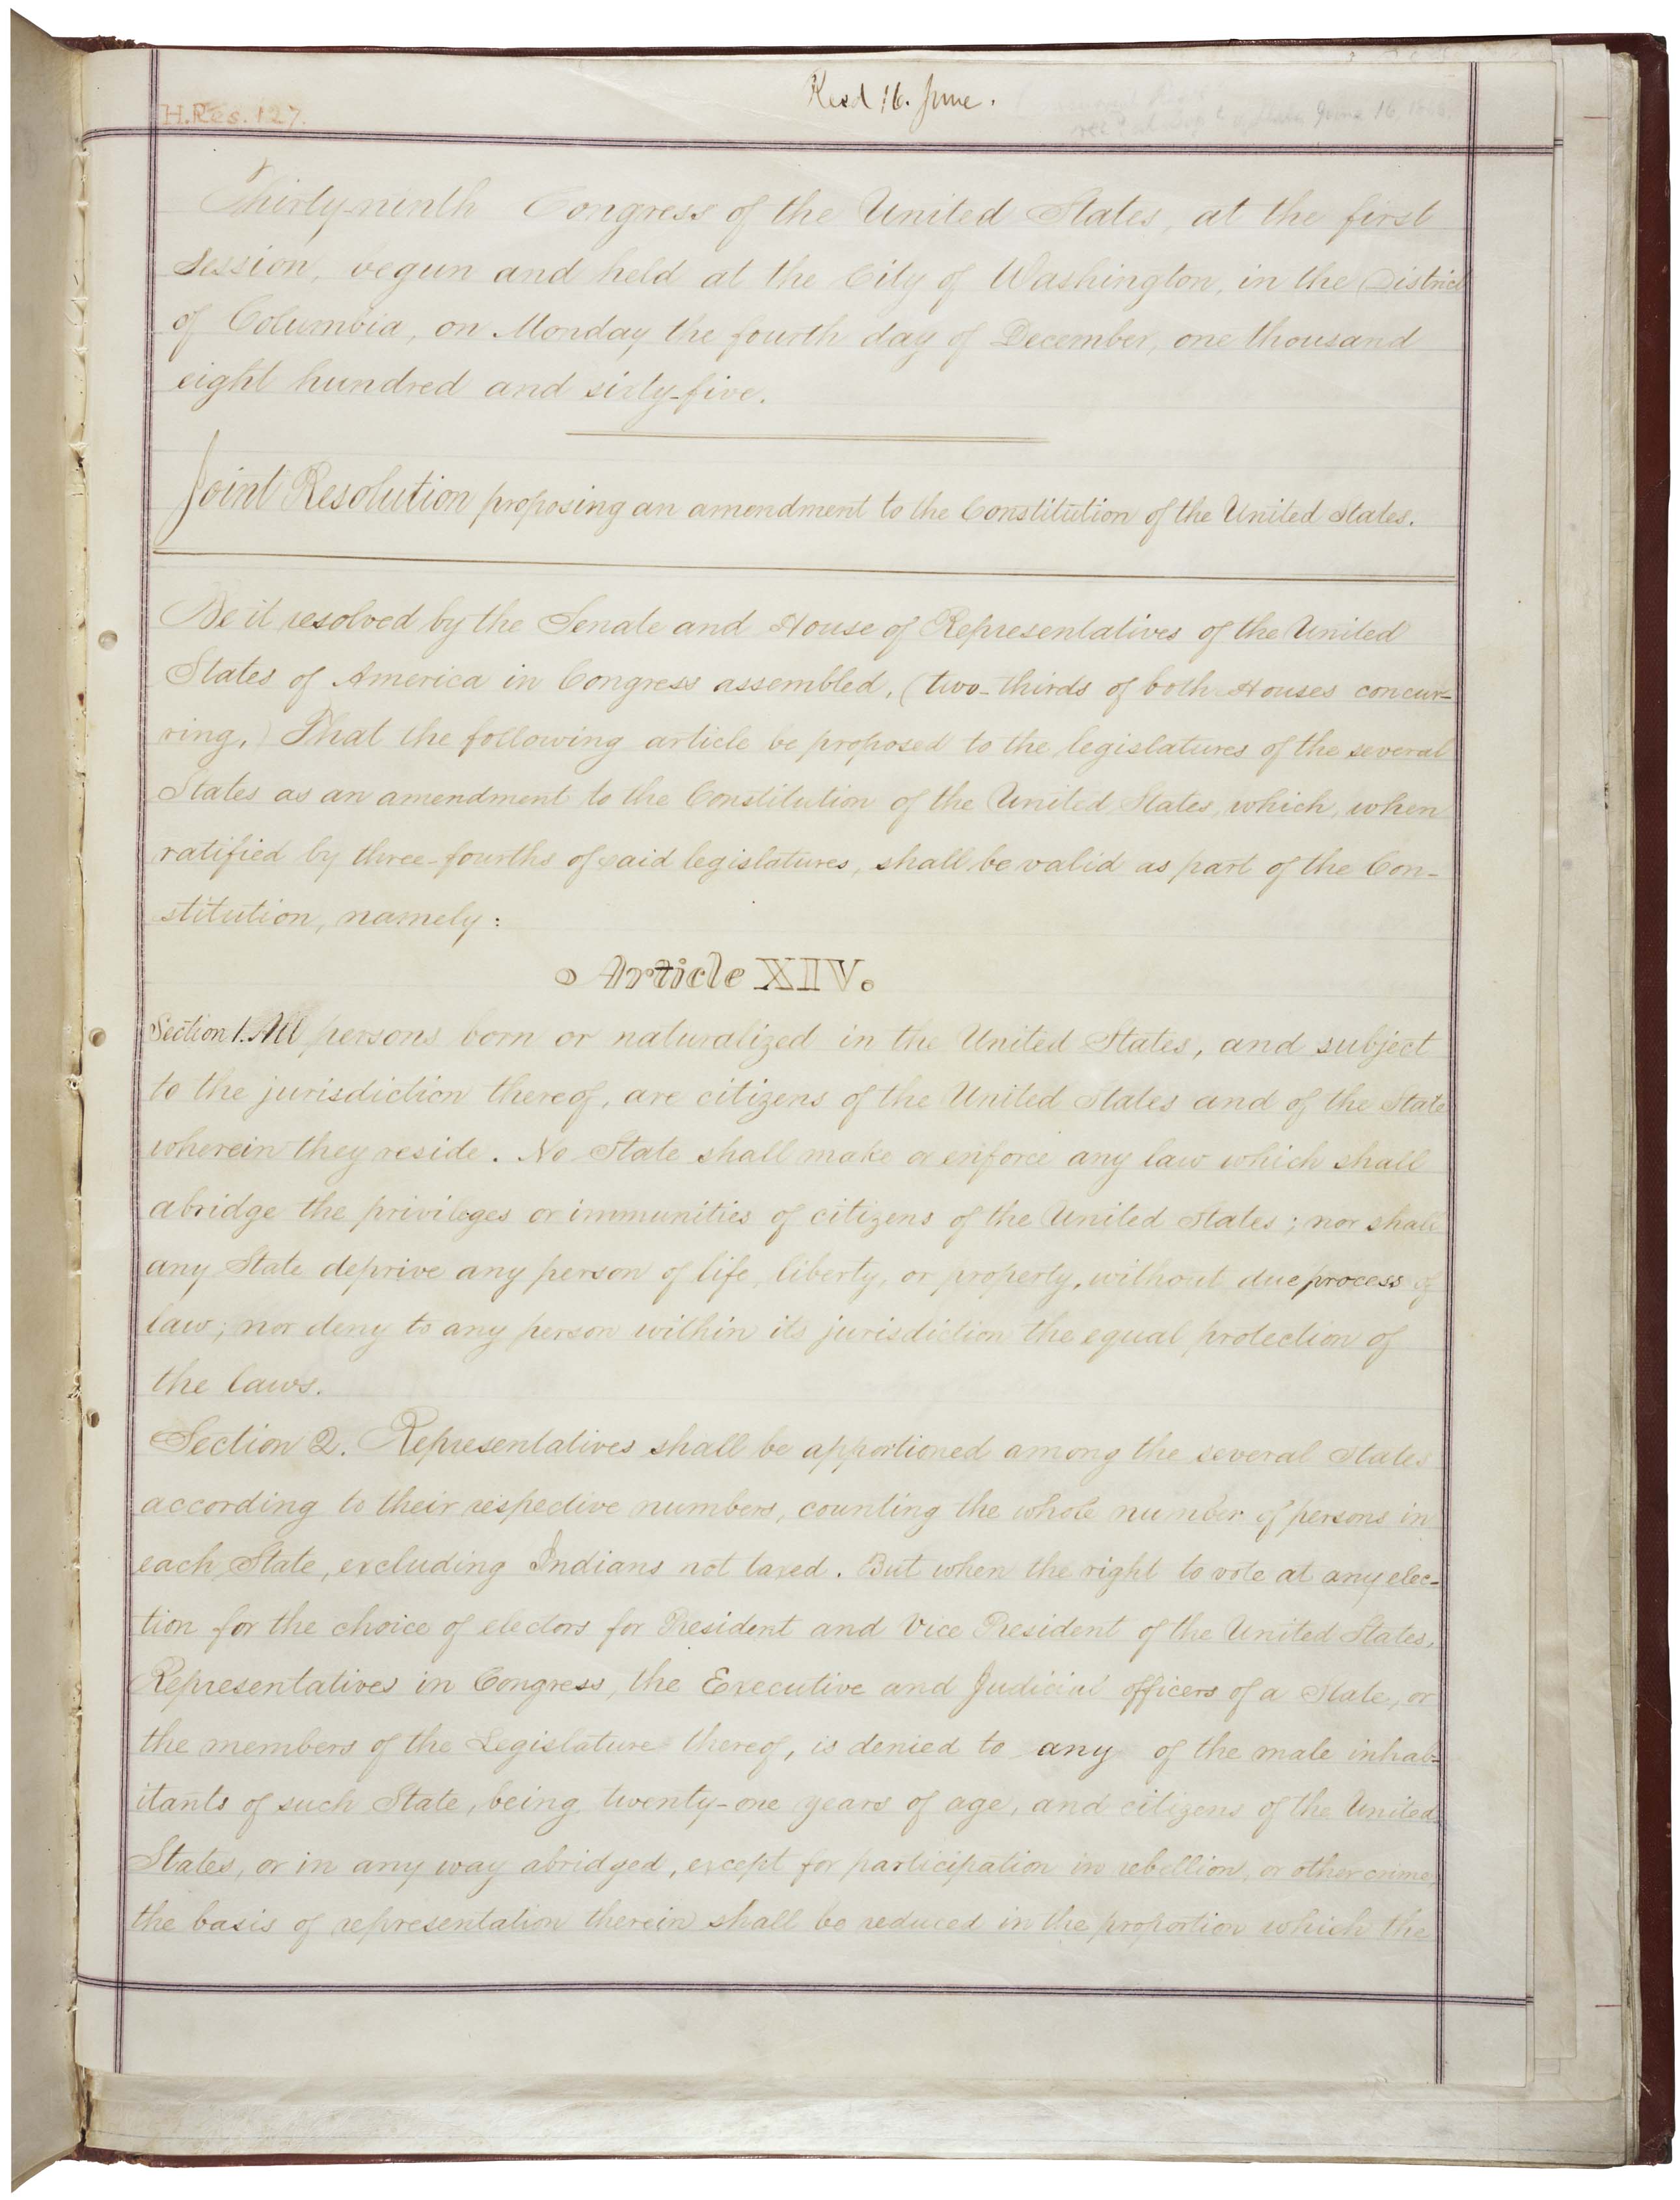 14th Amendment to the US Constitution - Page 1 of 2